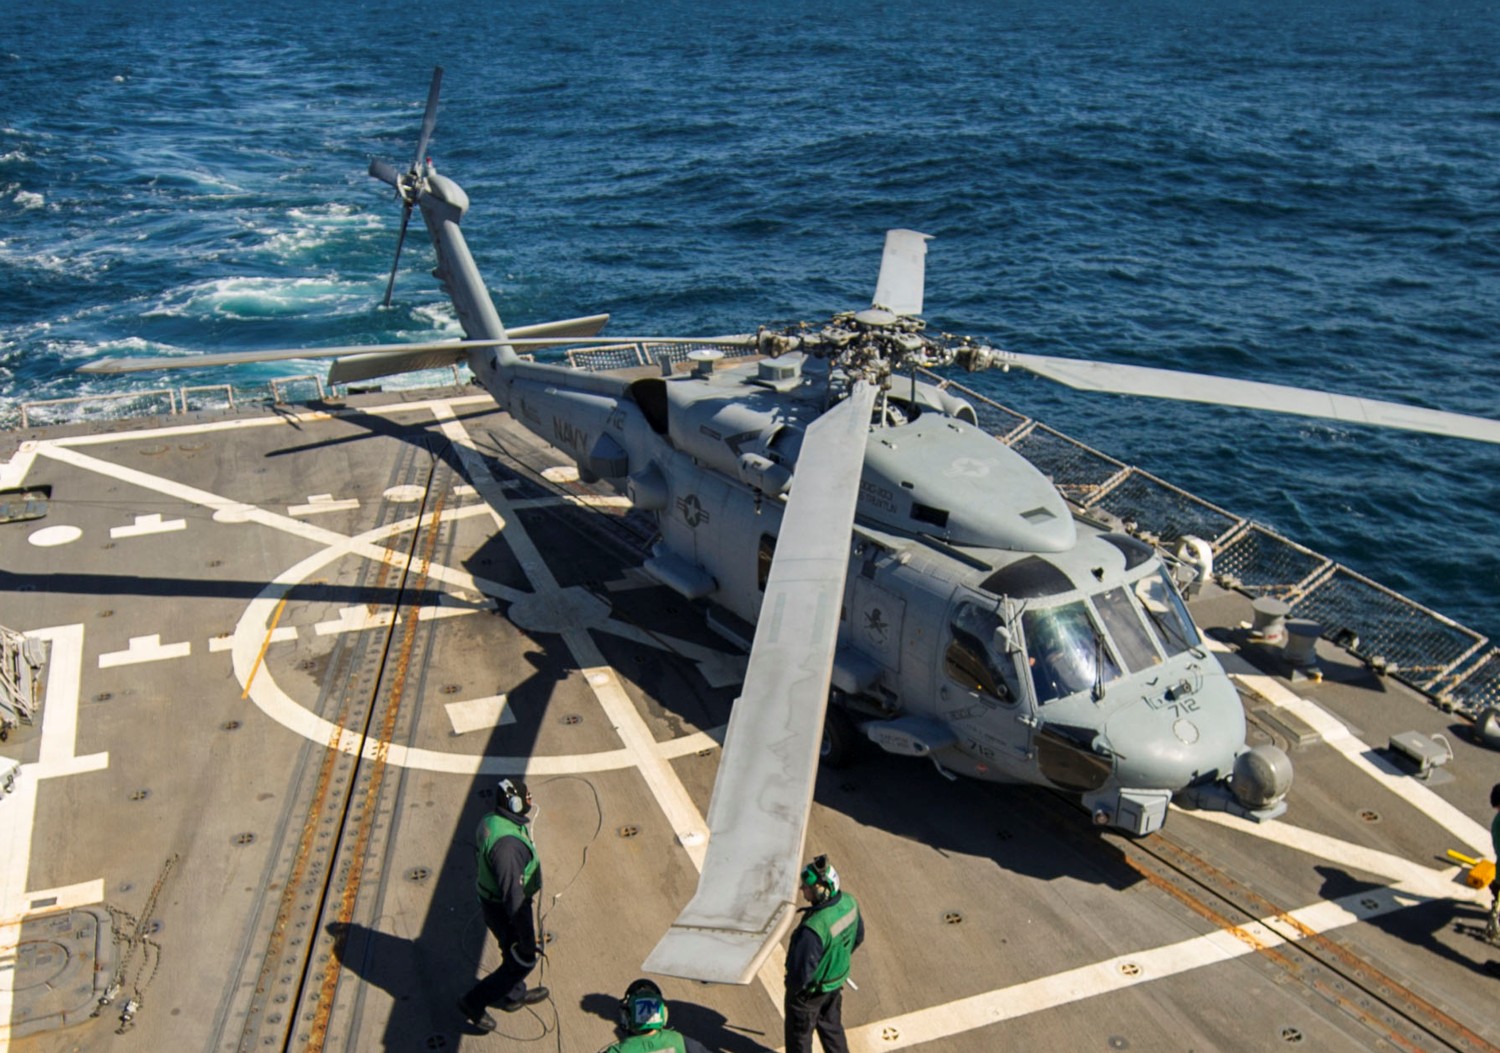 hsm-70 spartans helicopter maritime strike squadron mh-60r seahawk 2014 31